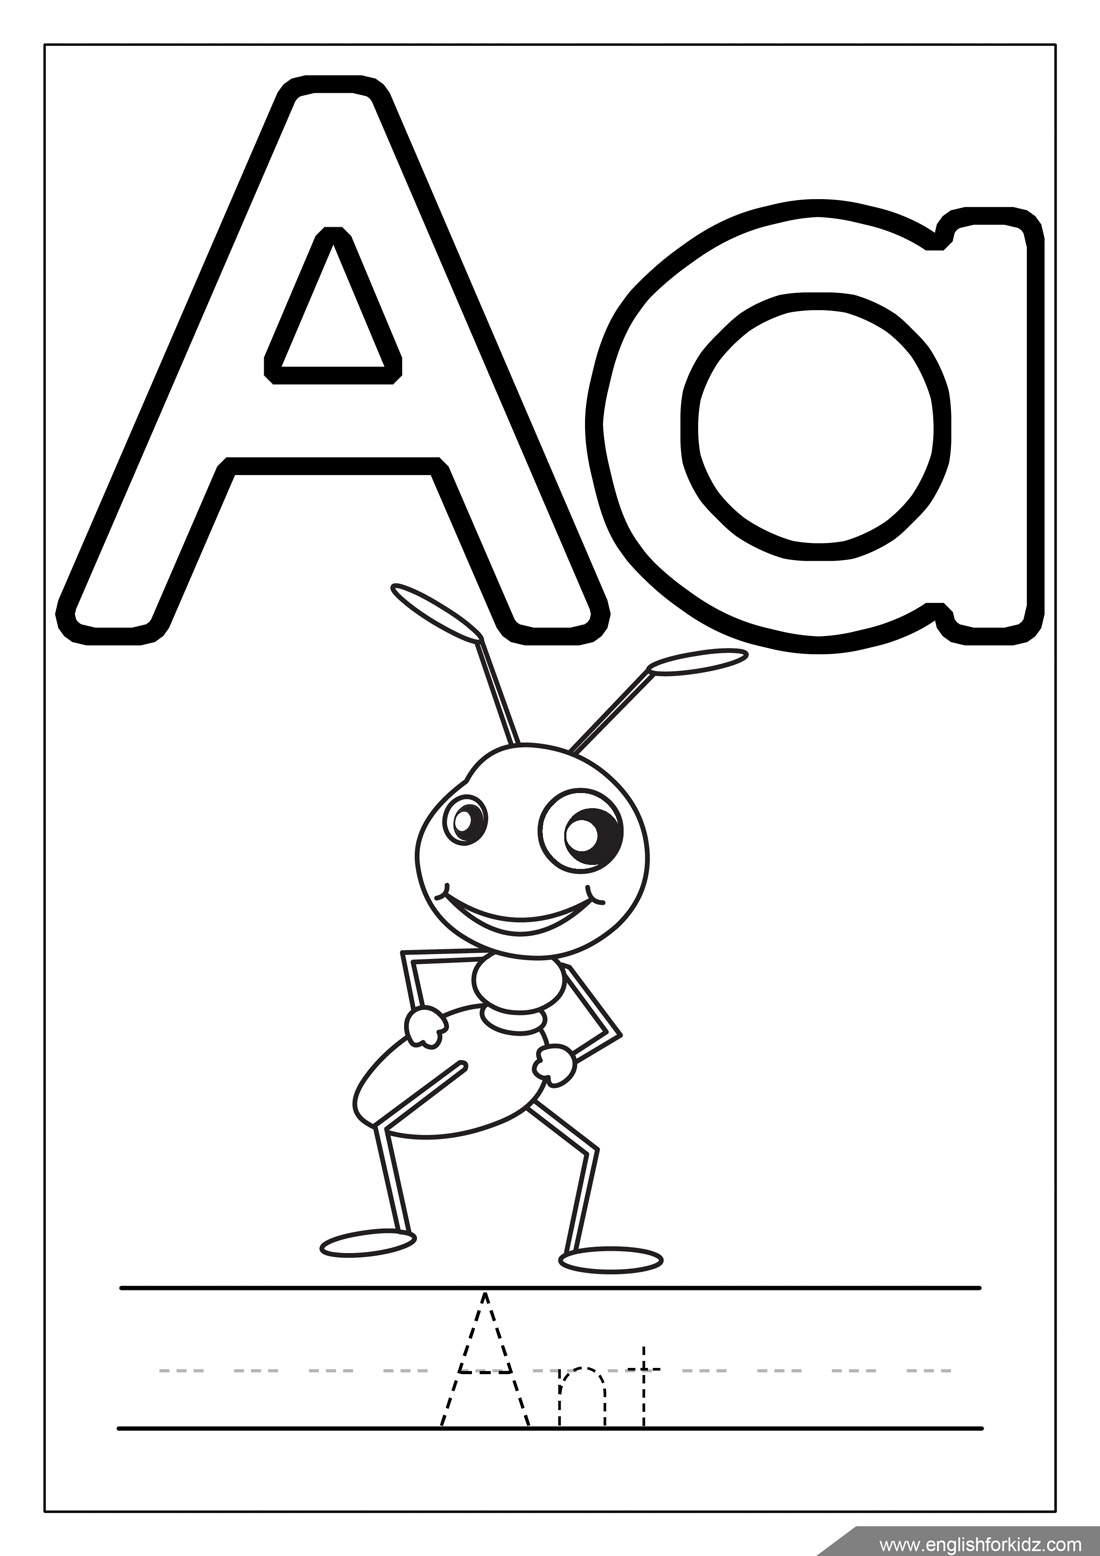 Download English for Kids Step by Step: Printable Alphabet Coloring ...